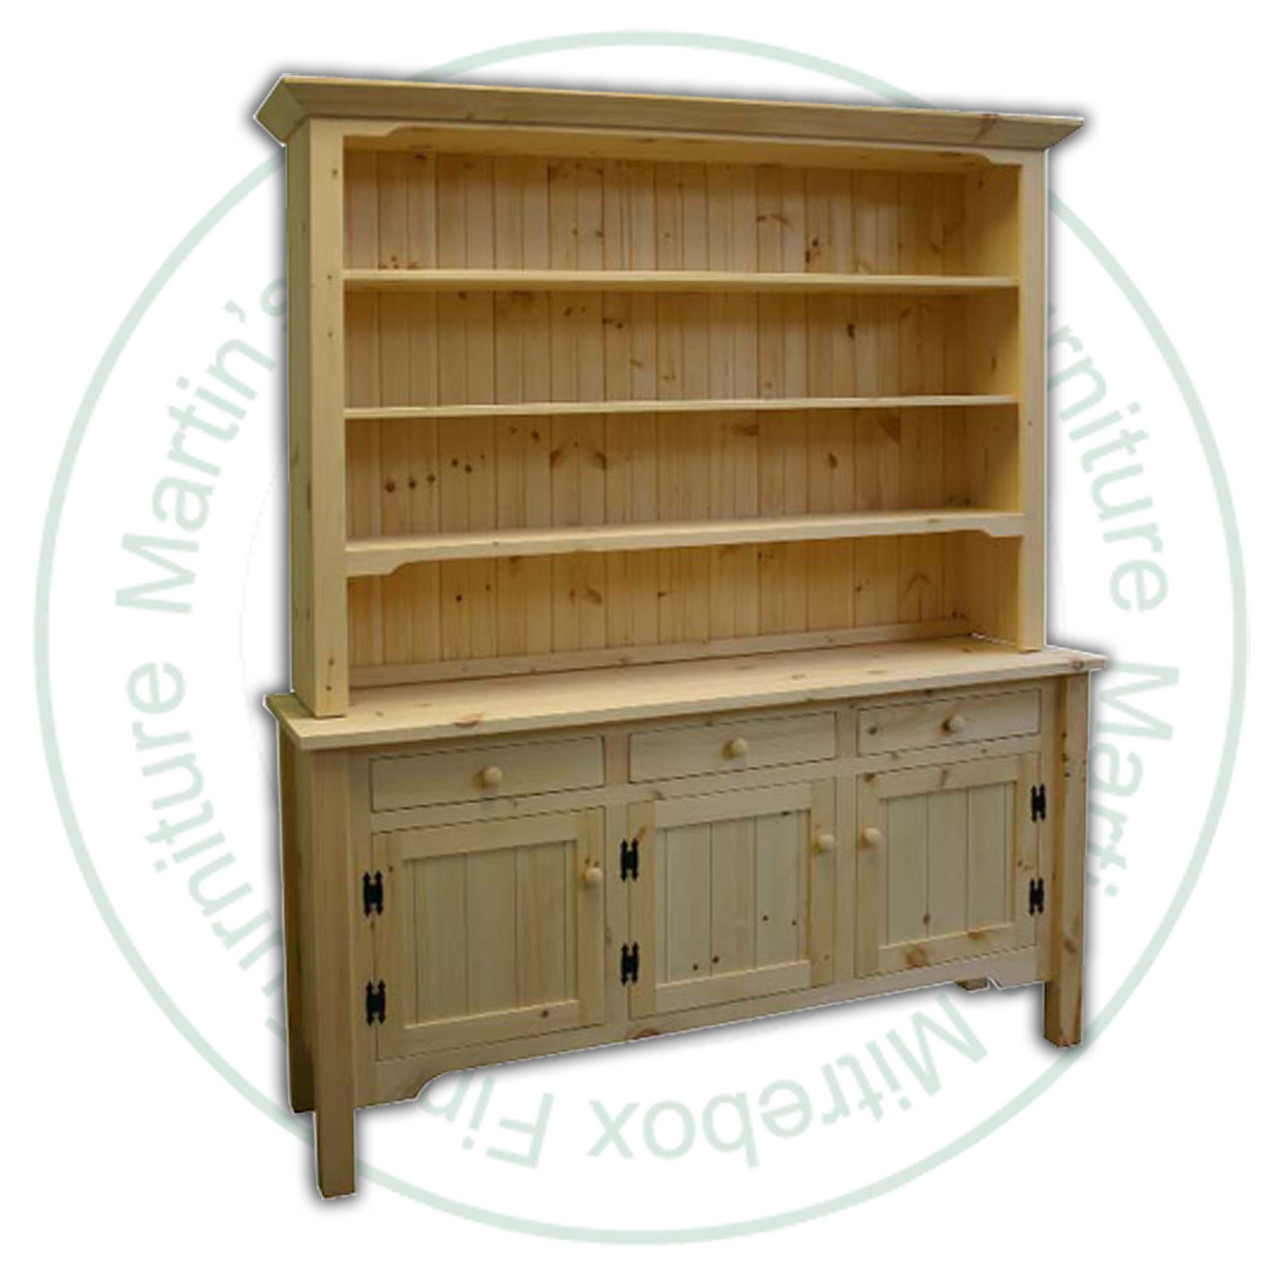 Maple French River Sideboard 18''D x 83''H x 70''W With 3 Doors And 3 Drawers